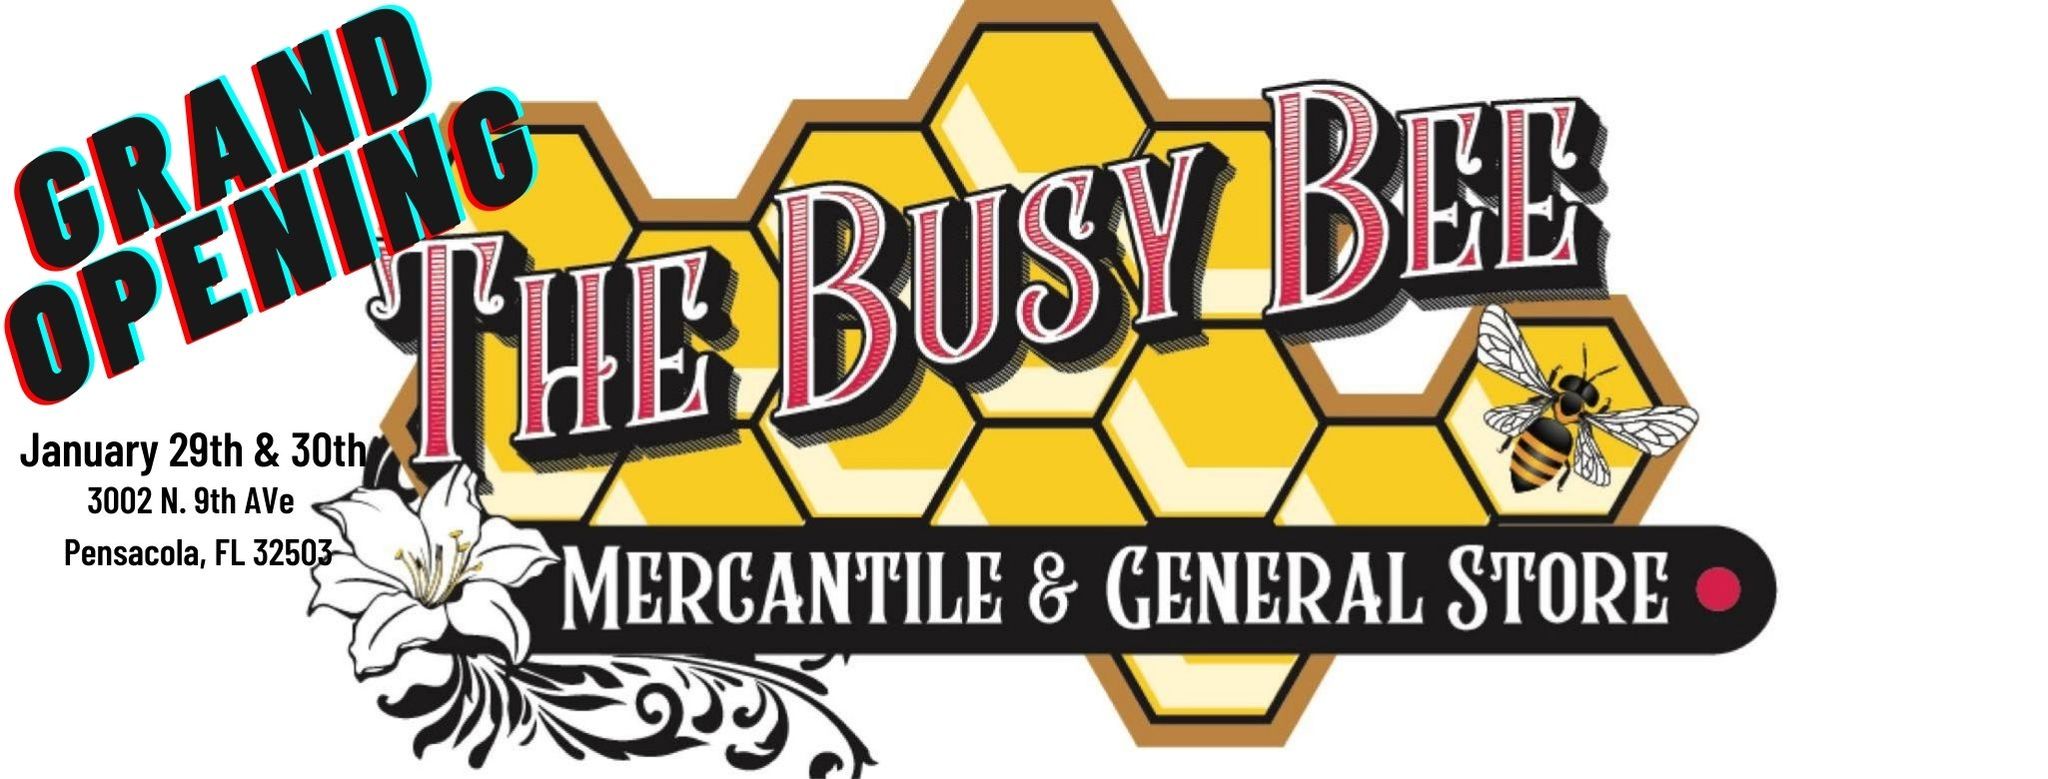 The Busy Bee Food Truck - Bantucola.com